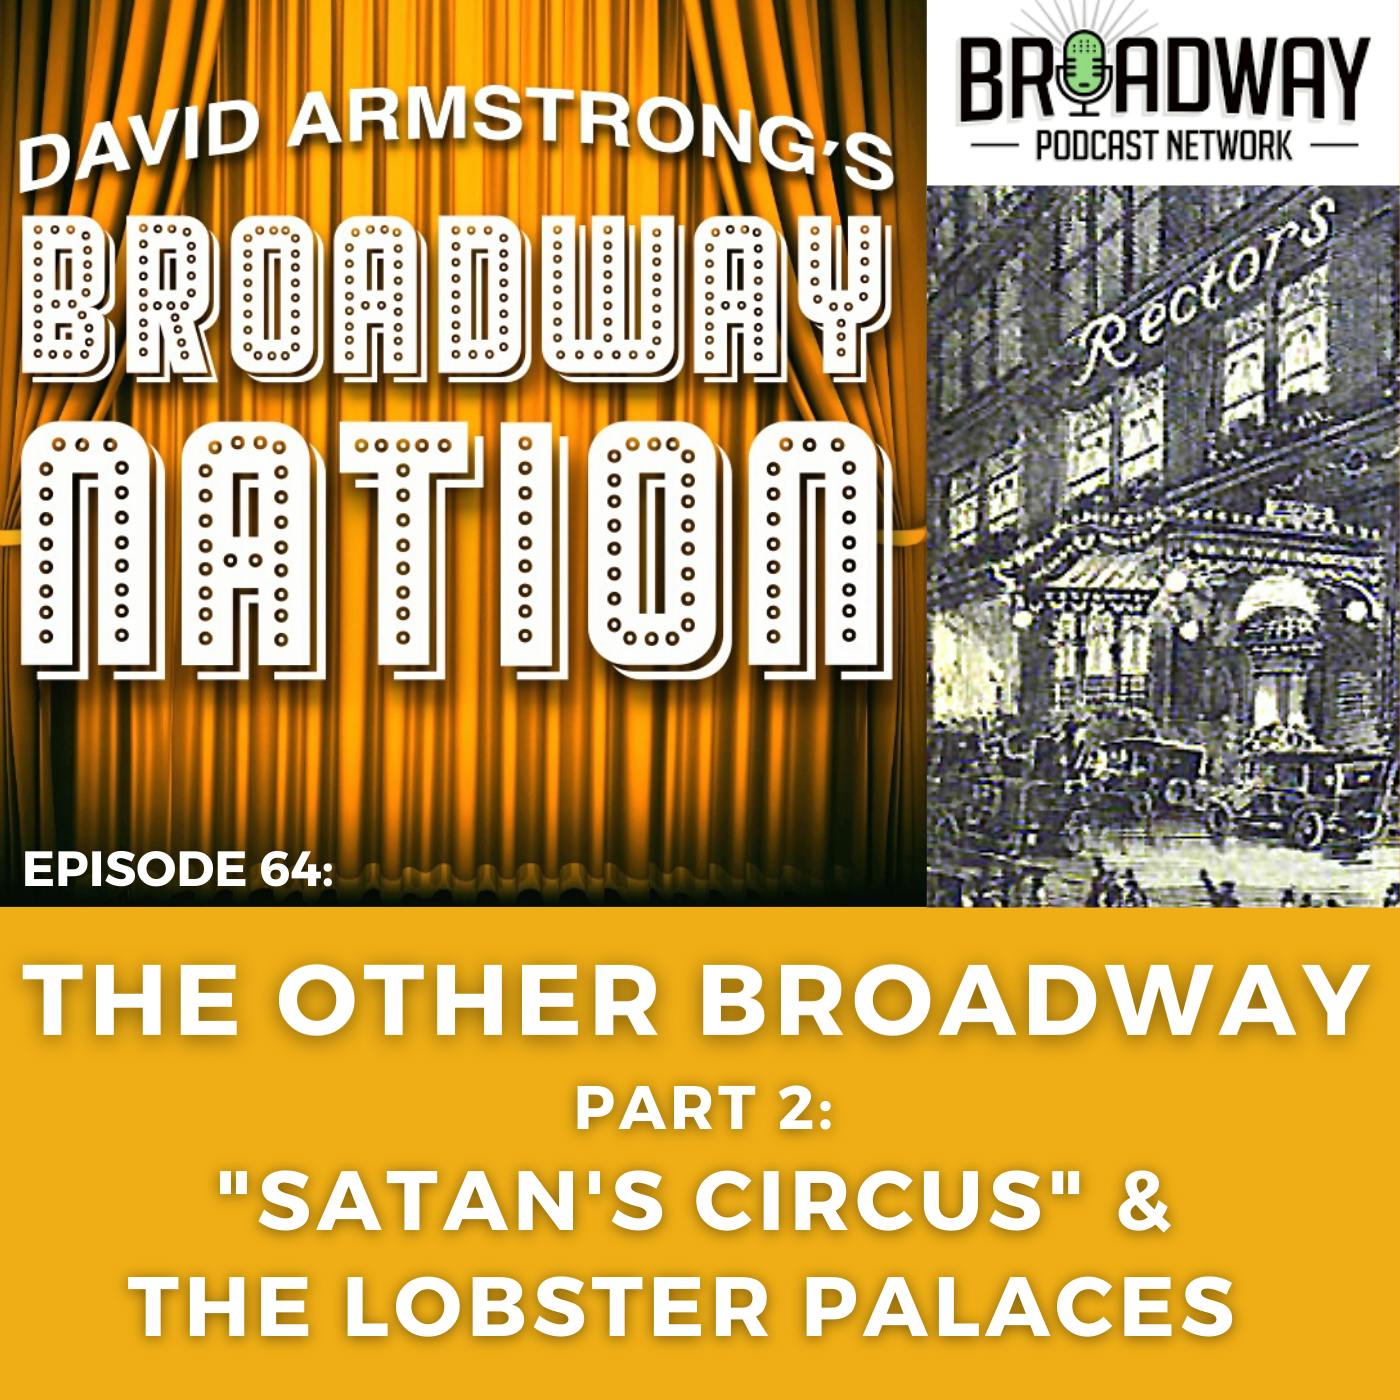 Episode 64: The Other Broadway, Part 2 - "Satan's Circus" & The Lobster Palaces Image